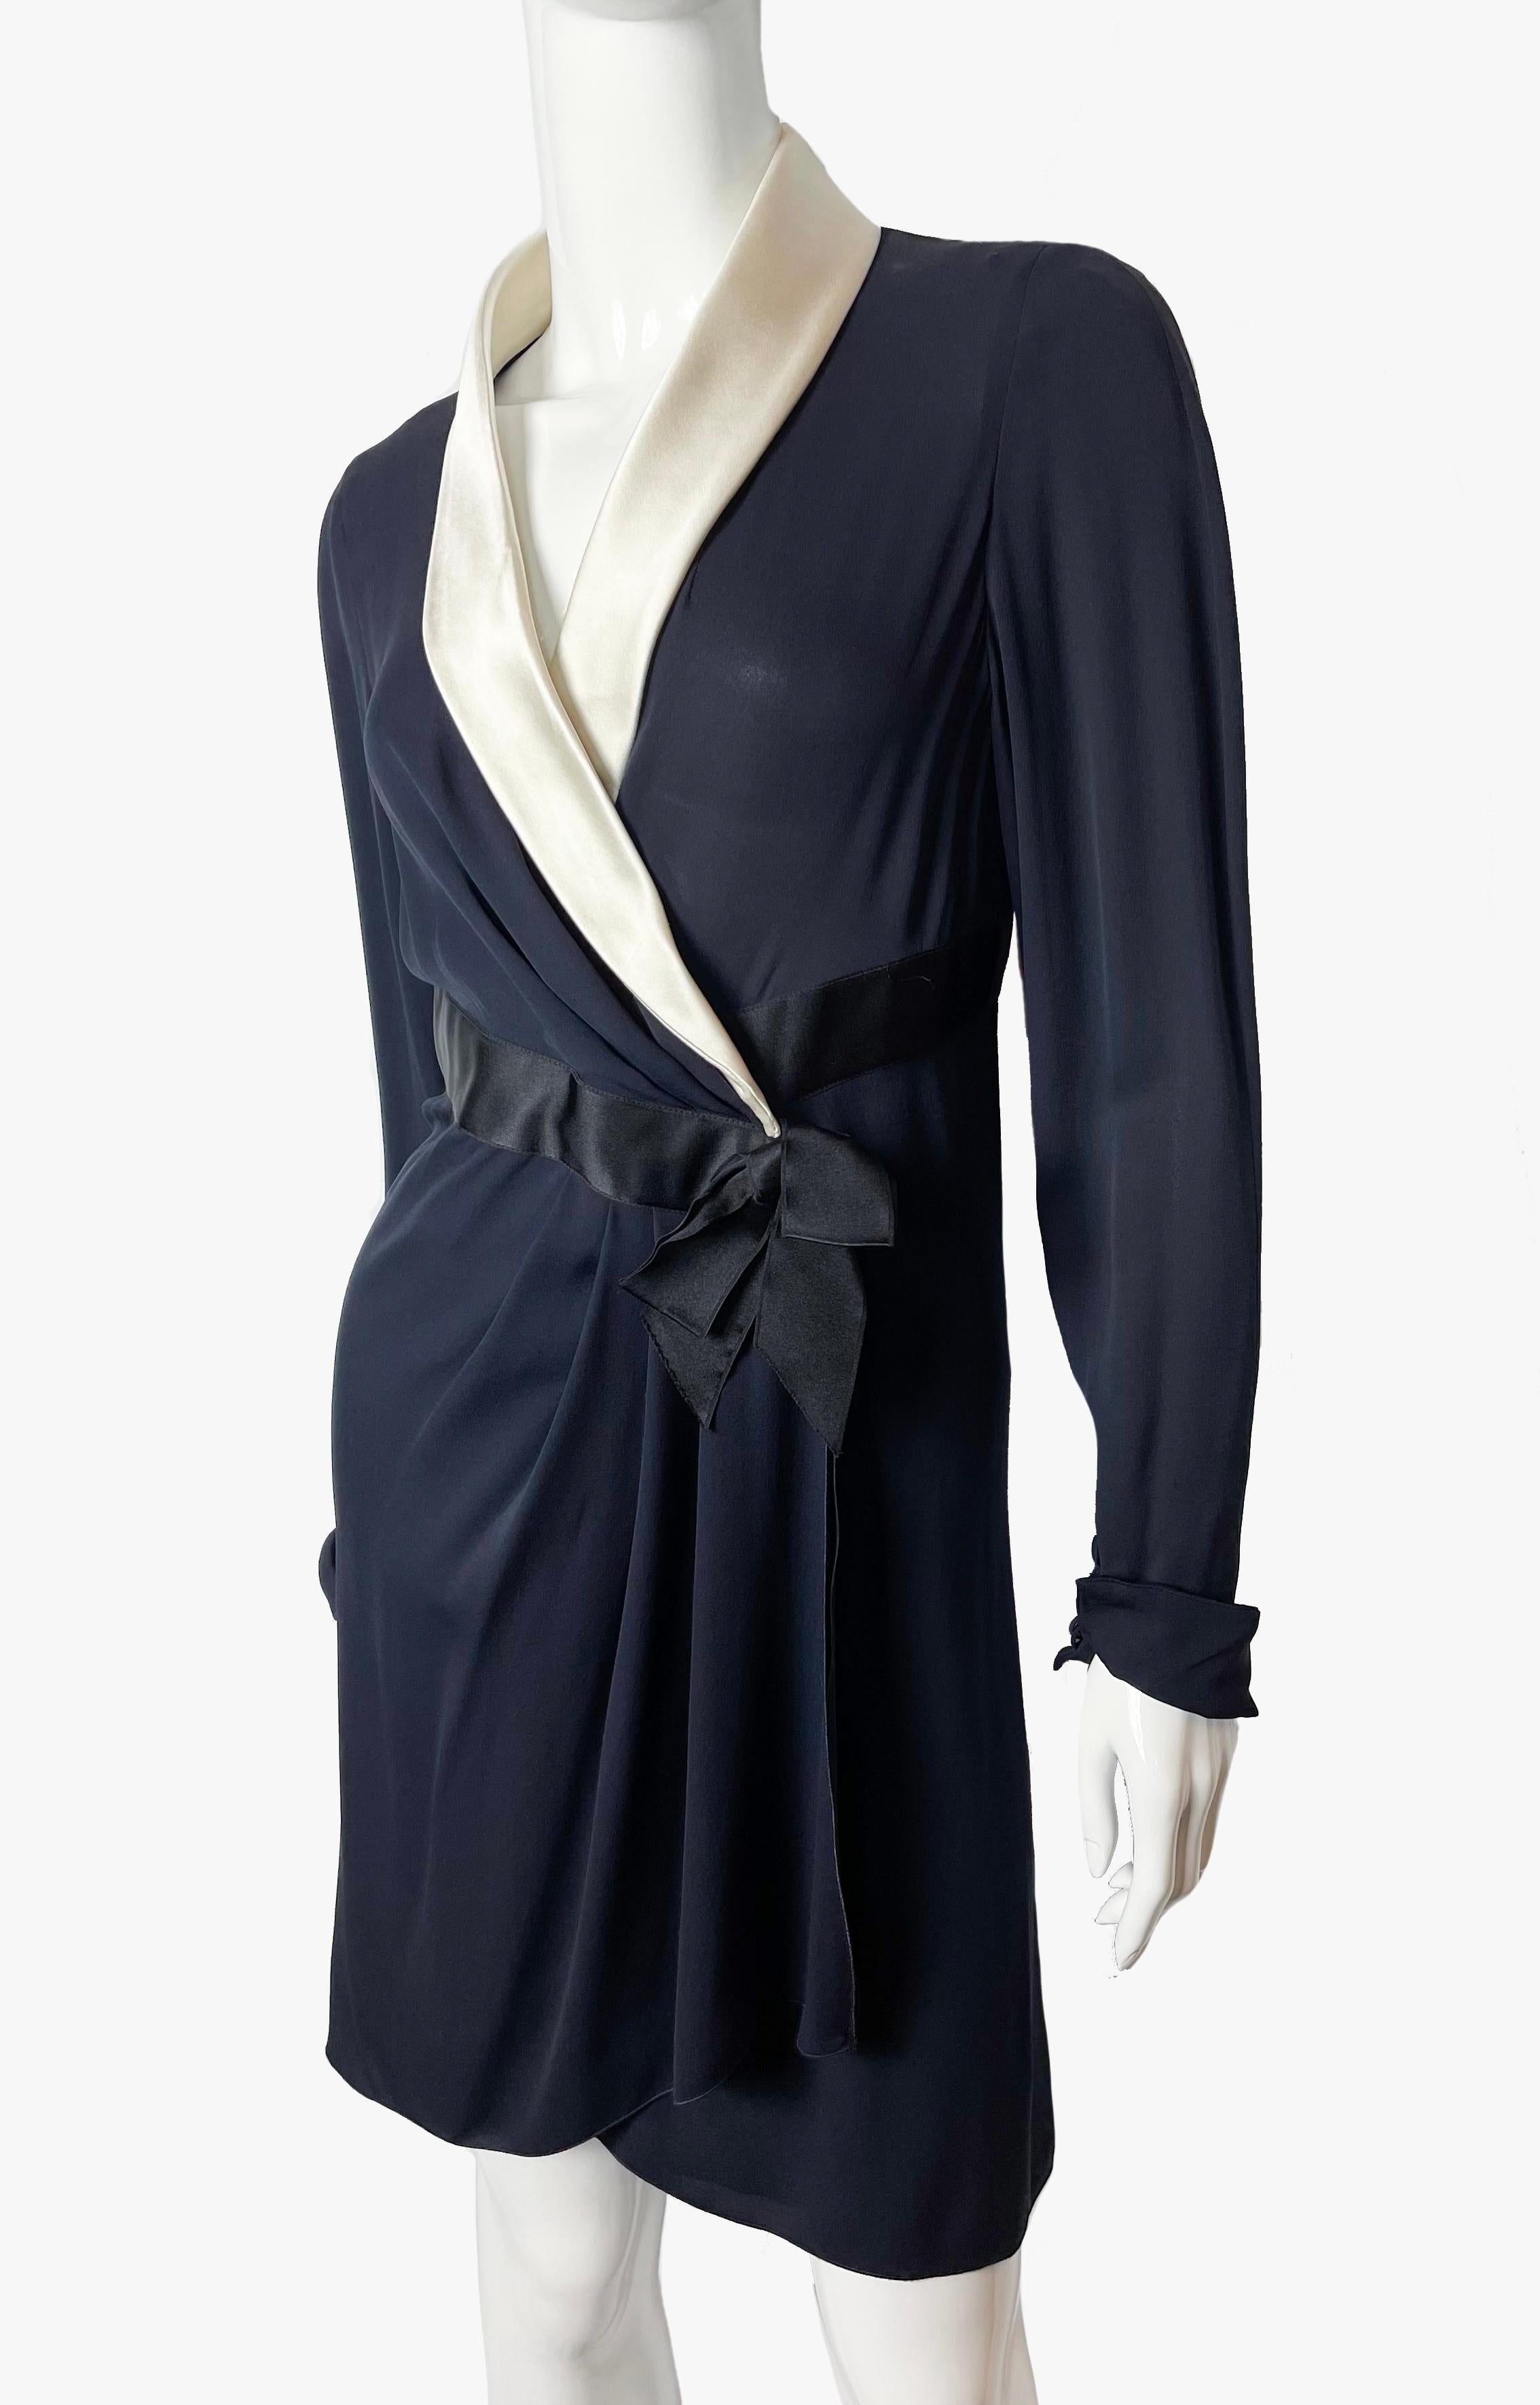 Vintage Chanel Boutique dark blue silk evening dress with ivory V-neck collar. Decorated with black ribbon and a small bow.
Long straight sleeves with one button on the one side.
Period:1990s
Made in France
Composition: 100% silk
Measurements:
total